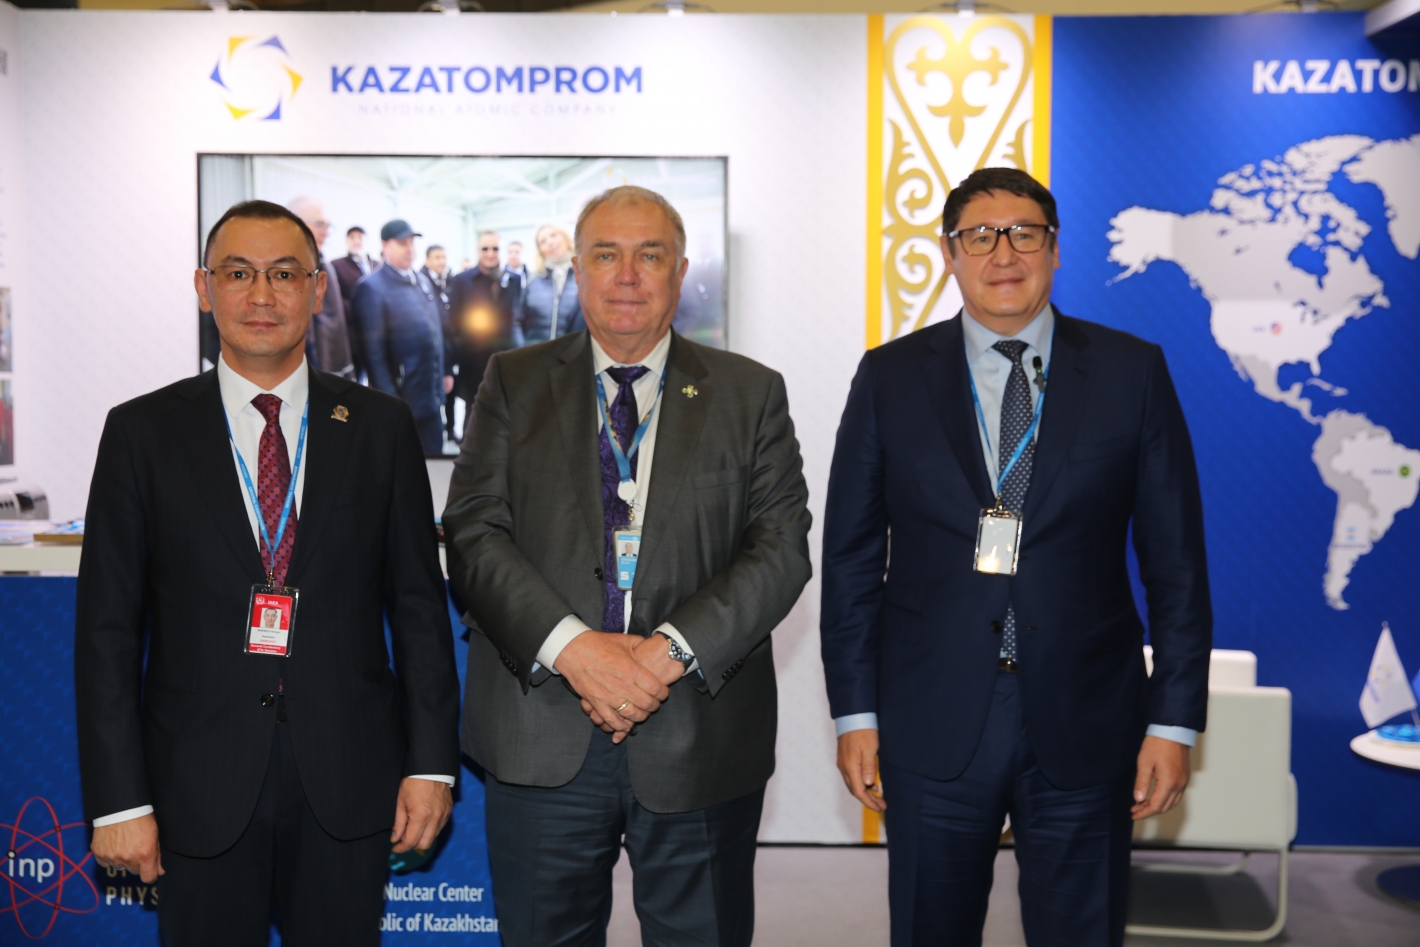 Kazatomprom is represented at the country stand as part of the IAEA General Conference